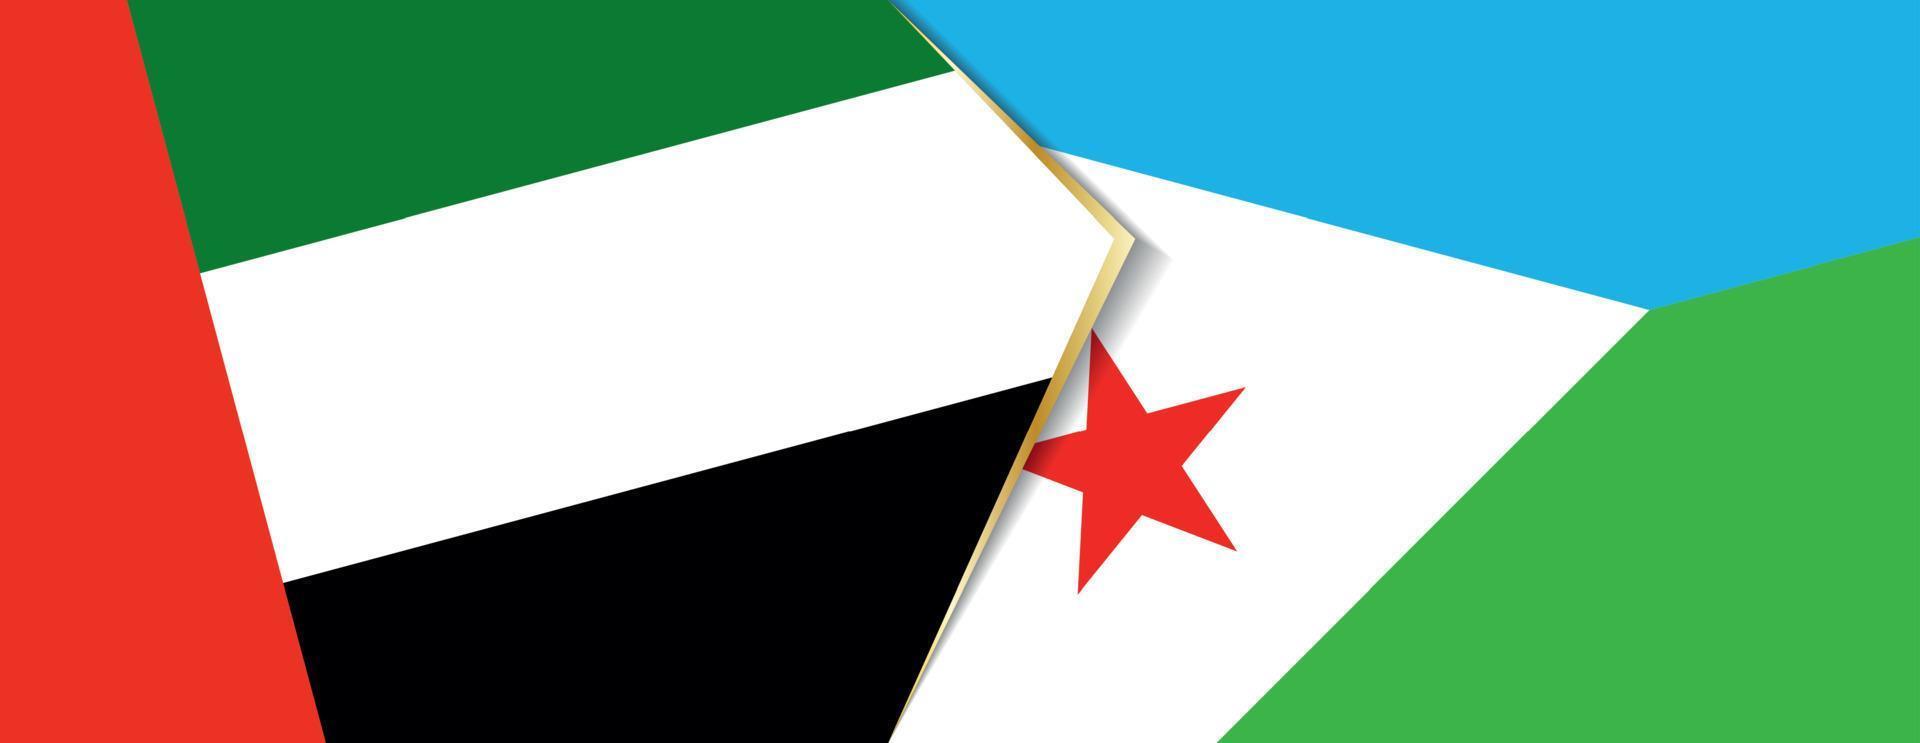 United Arab Emirates and Djibouti flags, two vector flags.